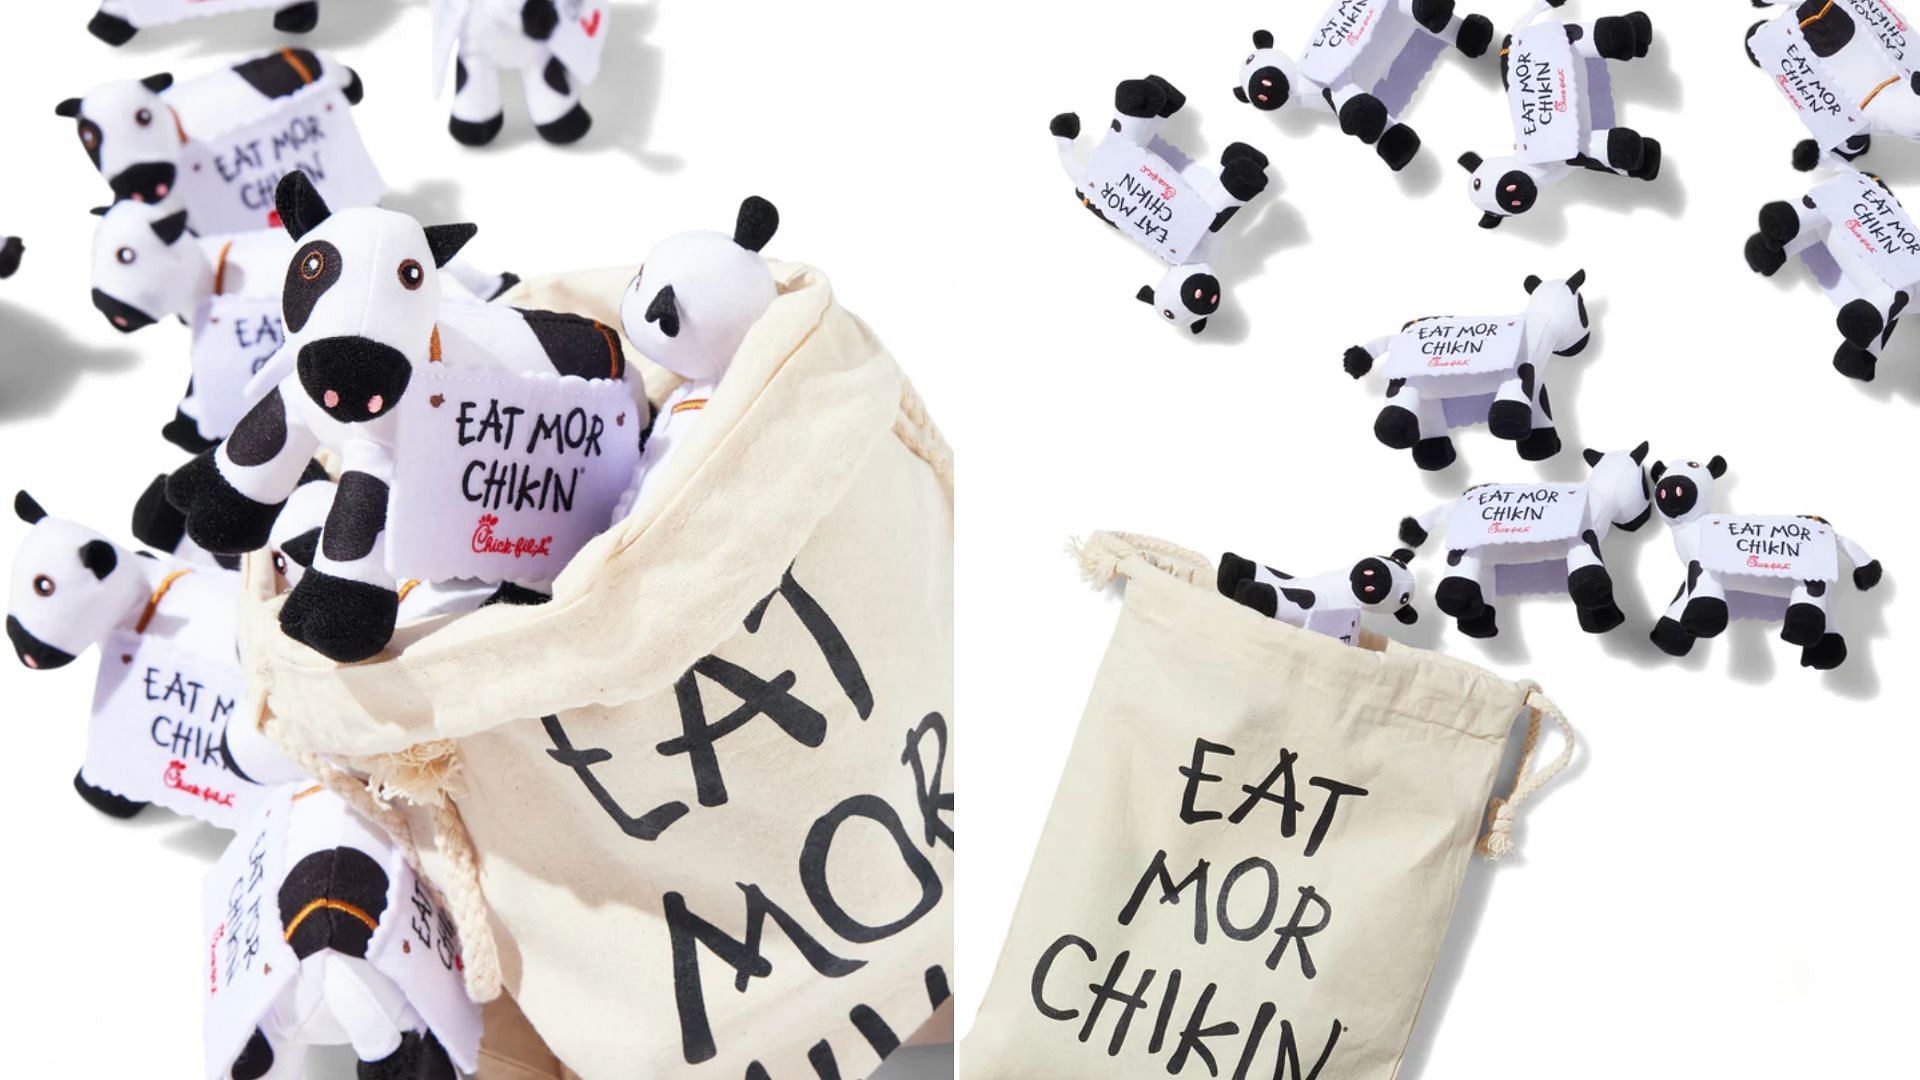 Shareable Bag of Cows merch (Image via Chick-fil-A)